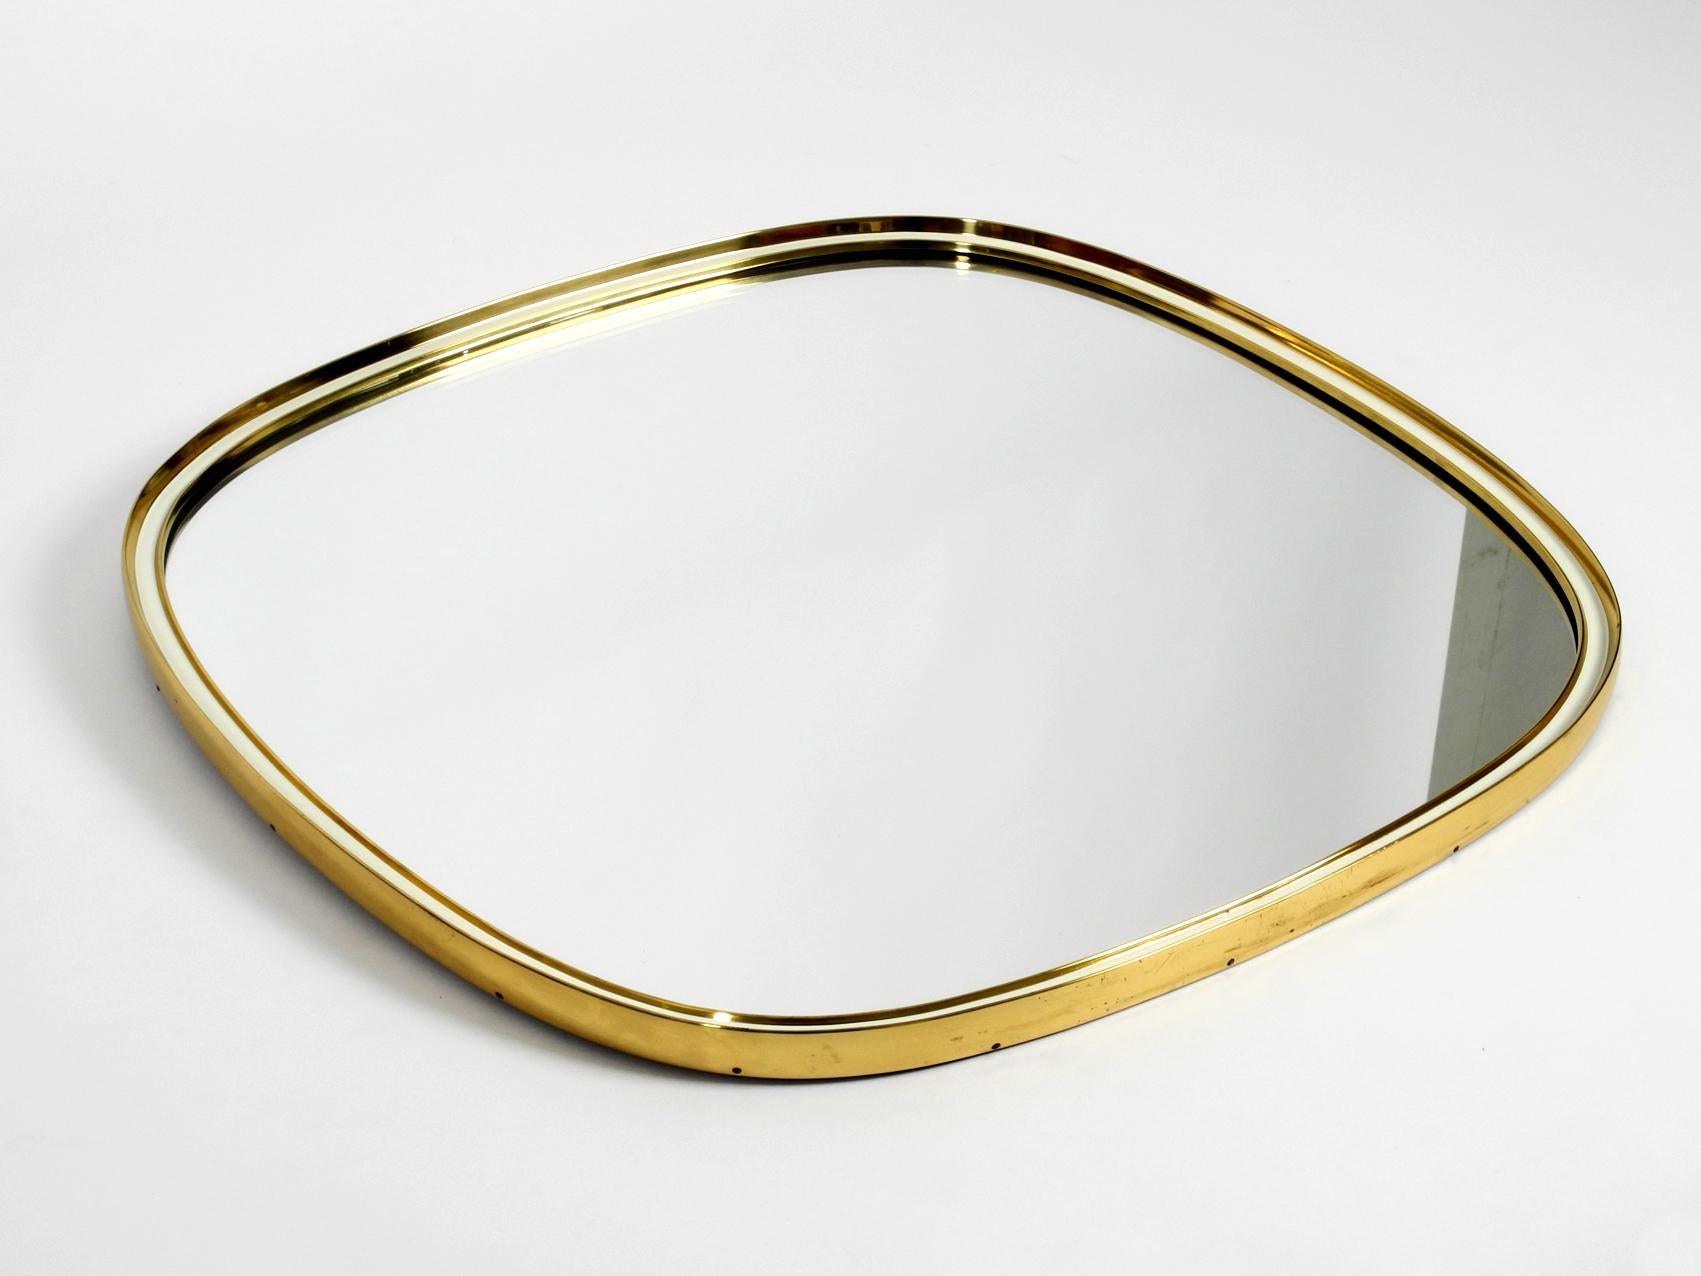 Beautiful heavy Mid-Century Modern wall mirror with heavy brass frame.
Manufacturer is Vereinigte Werkstätten. Made in Germany. Great 1950s minimalistic design.
Very high quality and solid. Weight approx. 8 kg.
Very good condition without damages